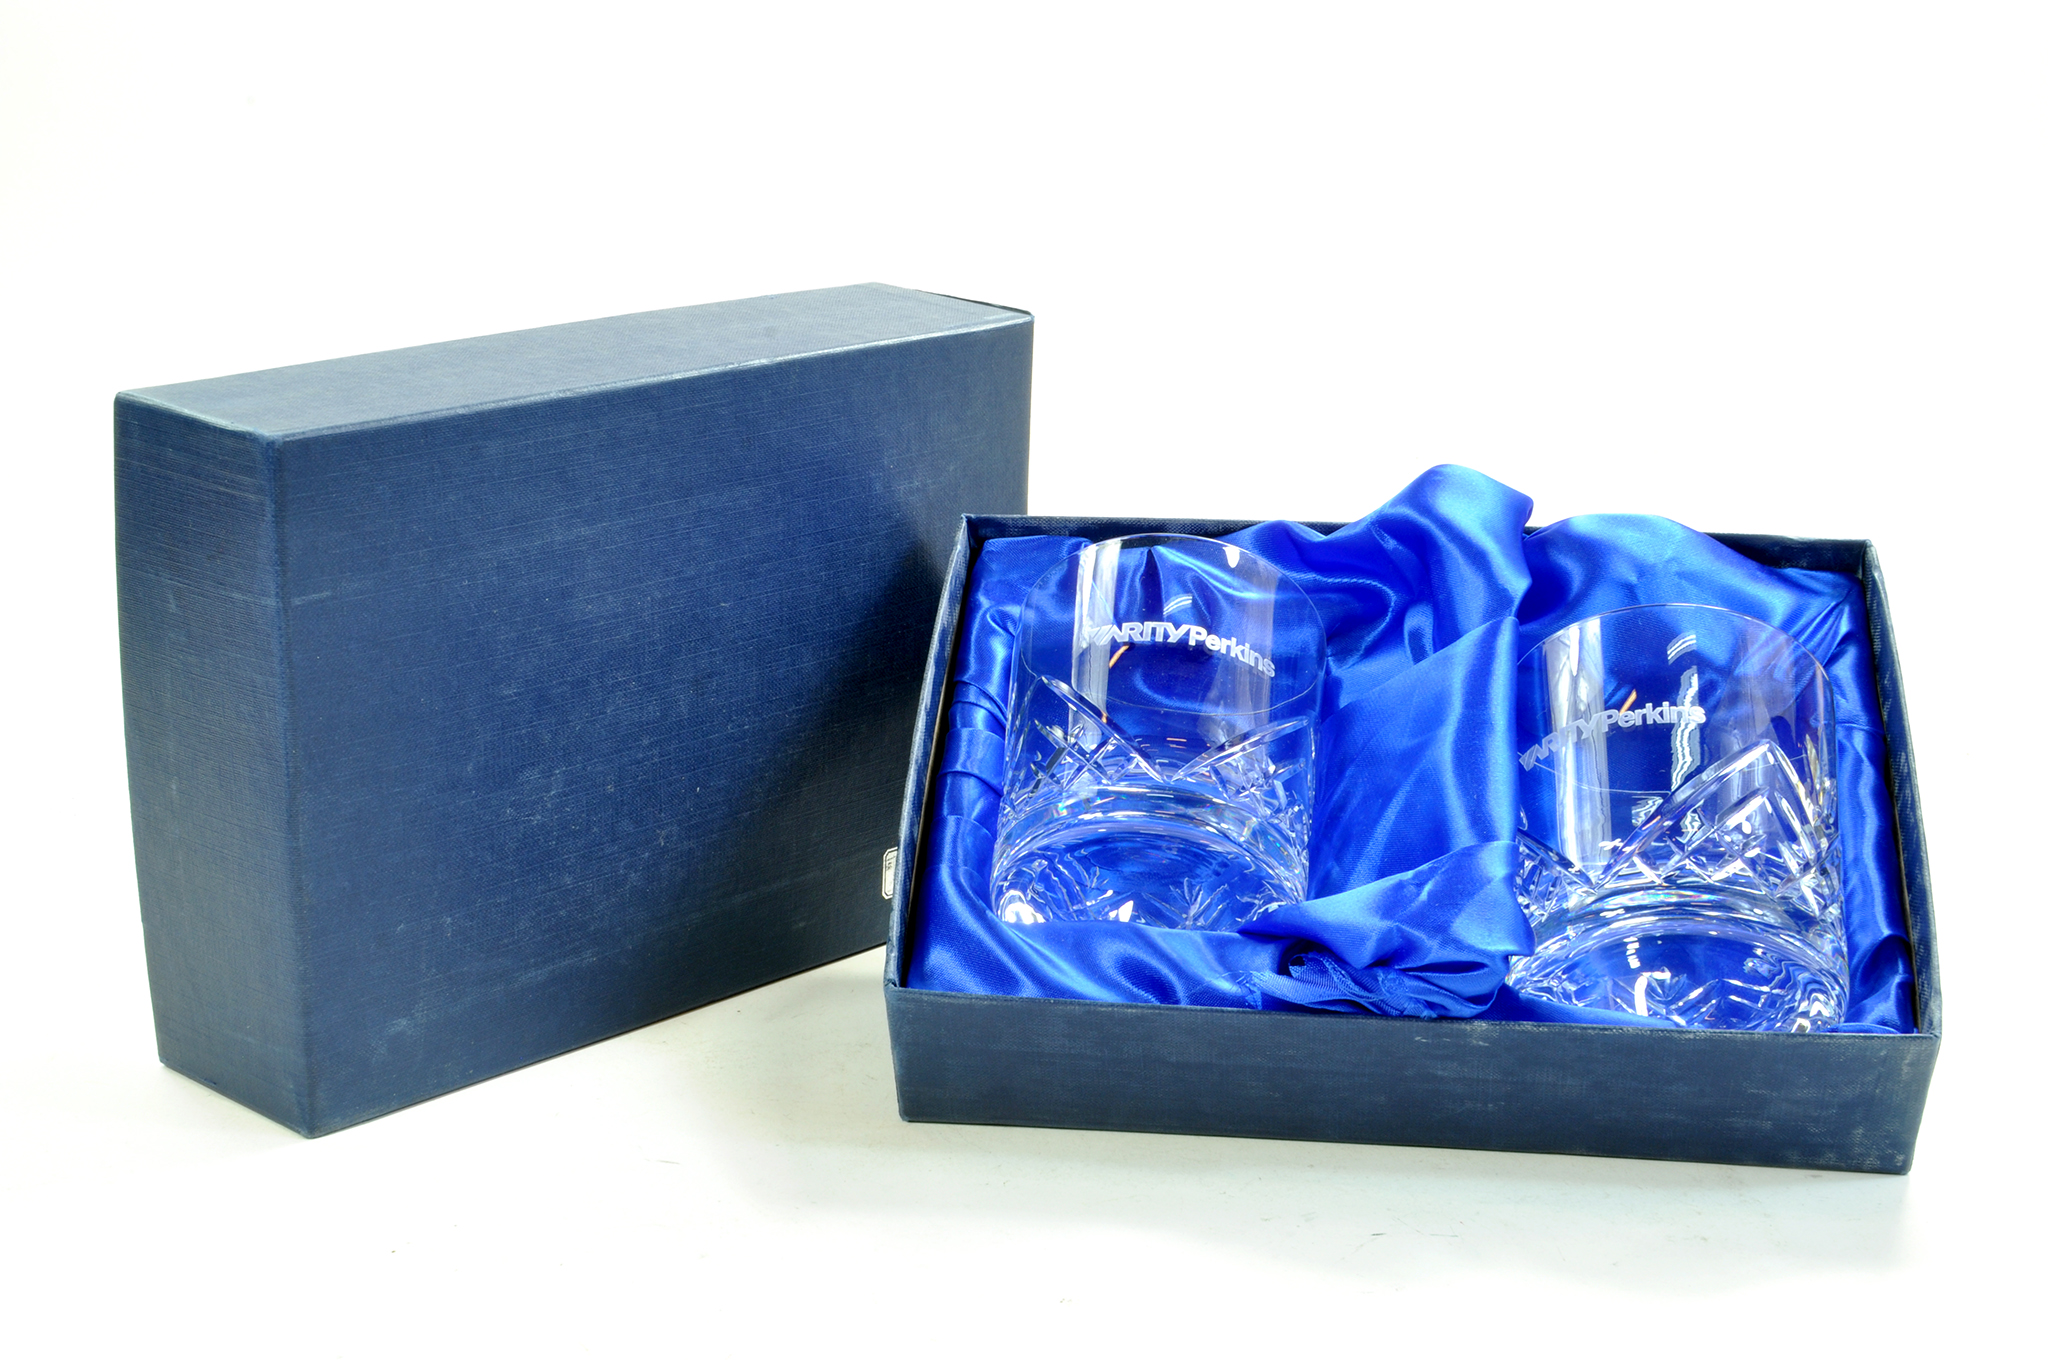 An impressive and rare Varity Perkins Crystal Etched Set of Limited Edition Tumbler Glasses with